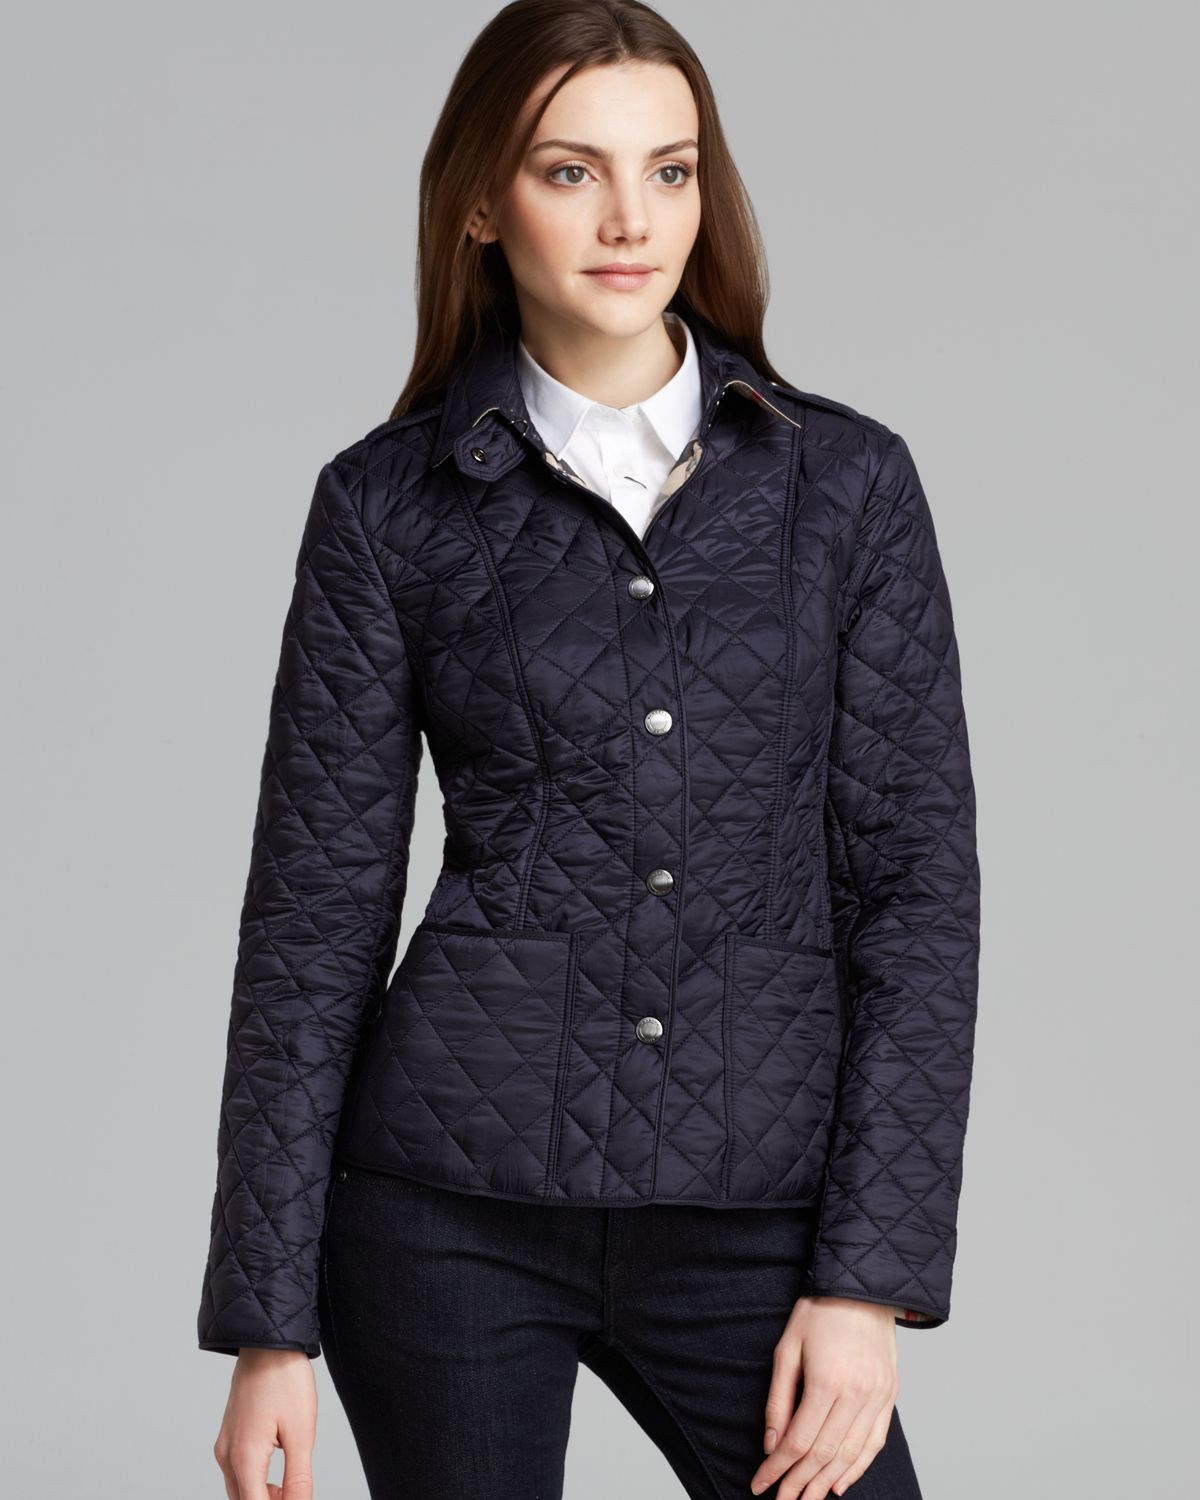 Burberry Brit Kencott Quilted Jacket in Blue - Lyst